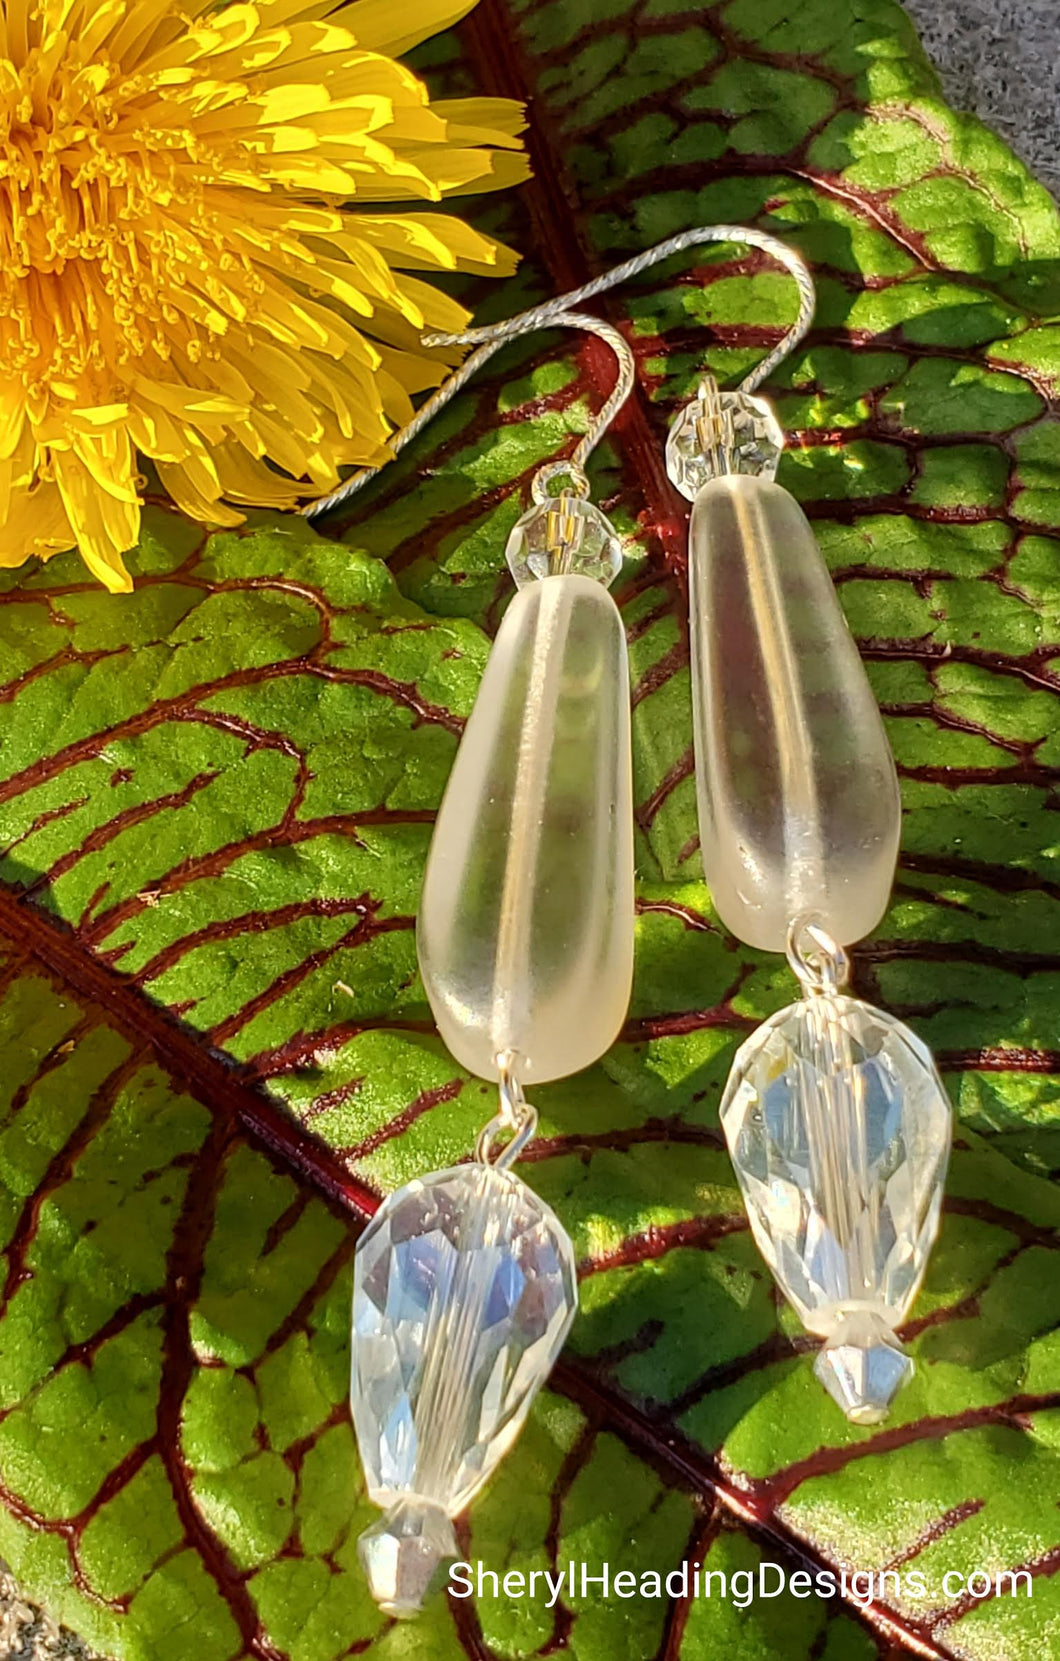 Exquisite Crystal Dangle Earrings - Sheryl Heading Designs